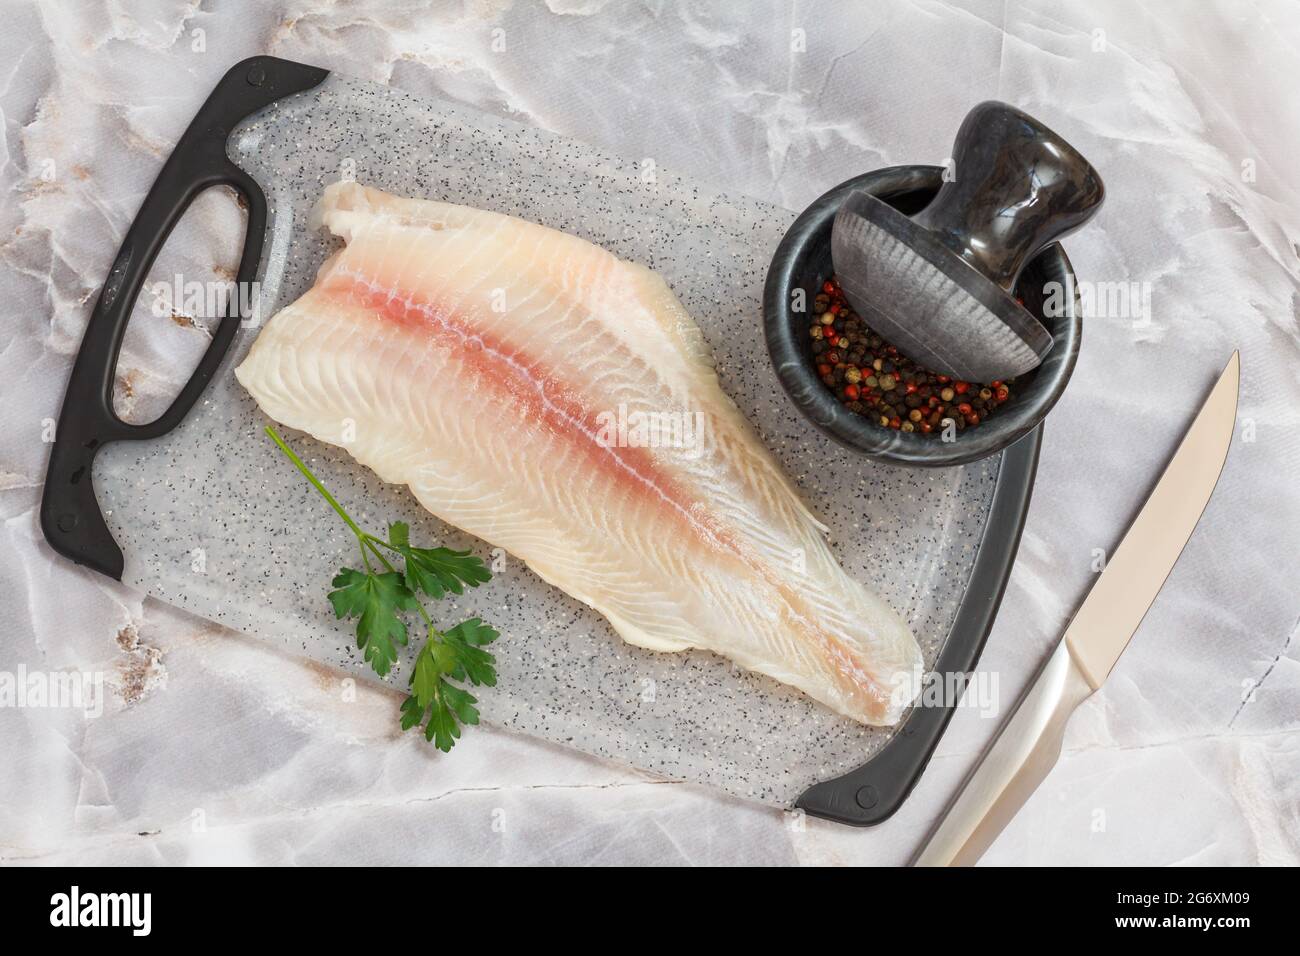 Fillet of raw pangasius fish with parsley on cutting board Stock Photo